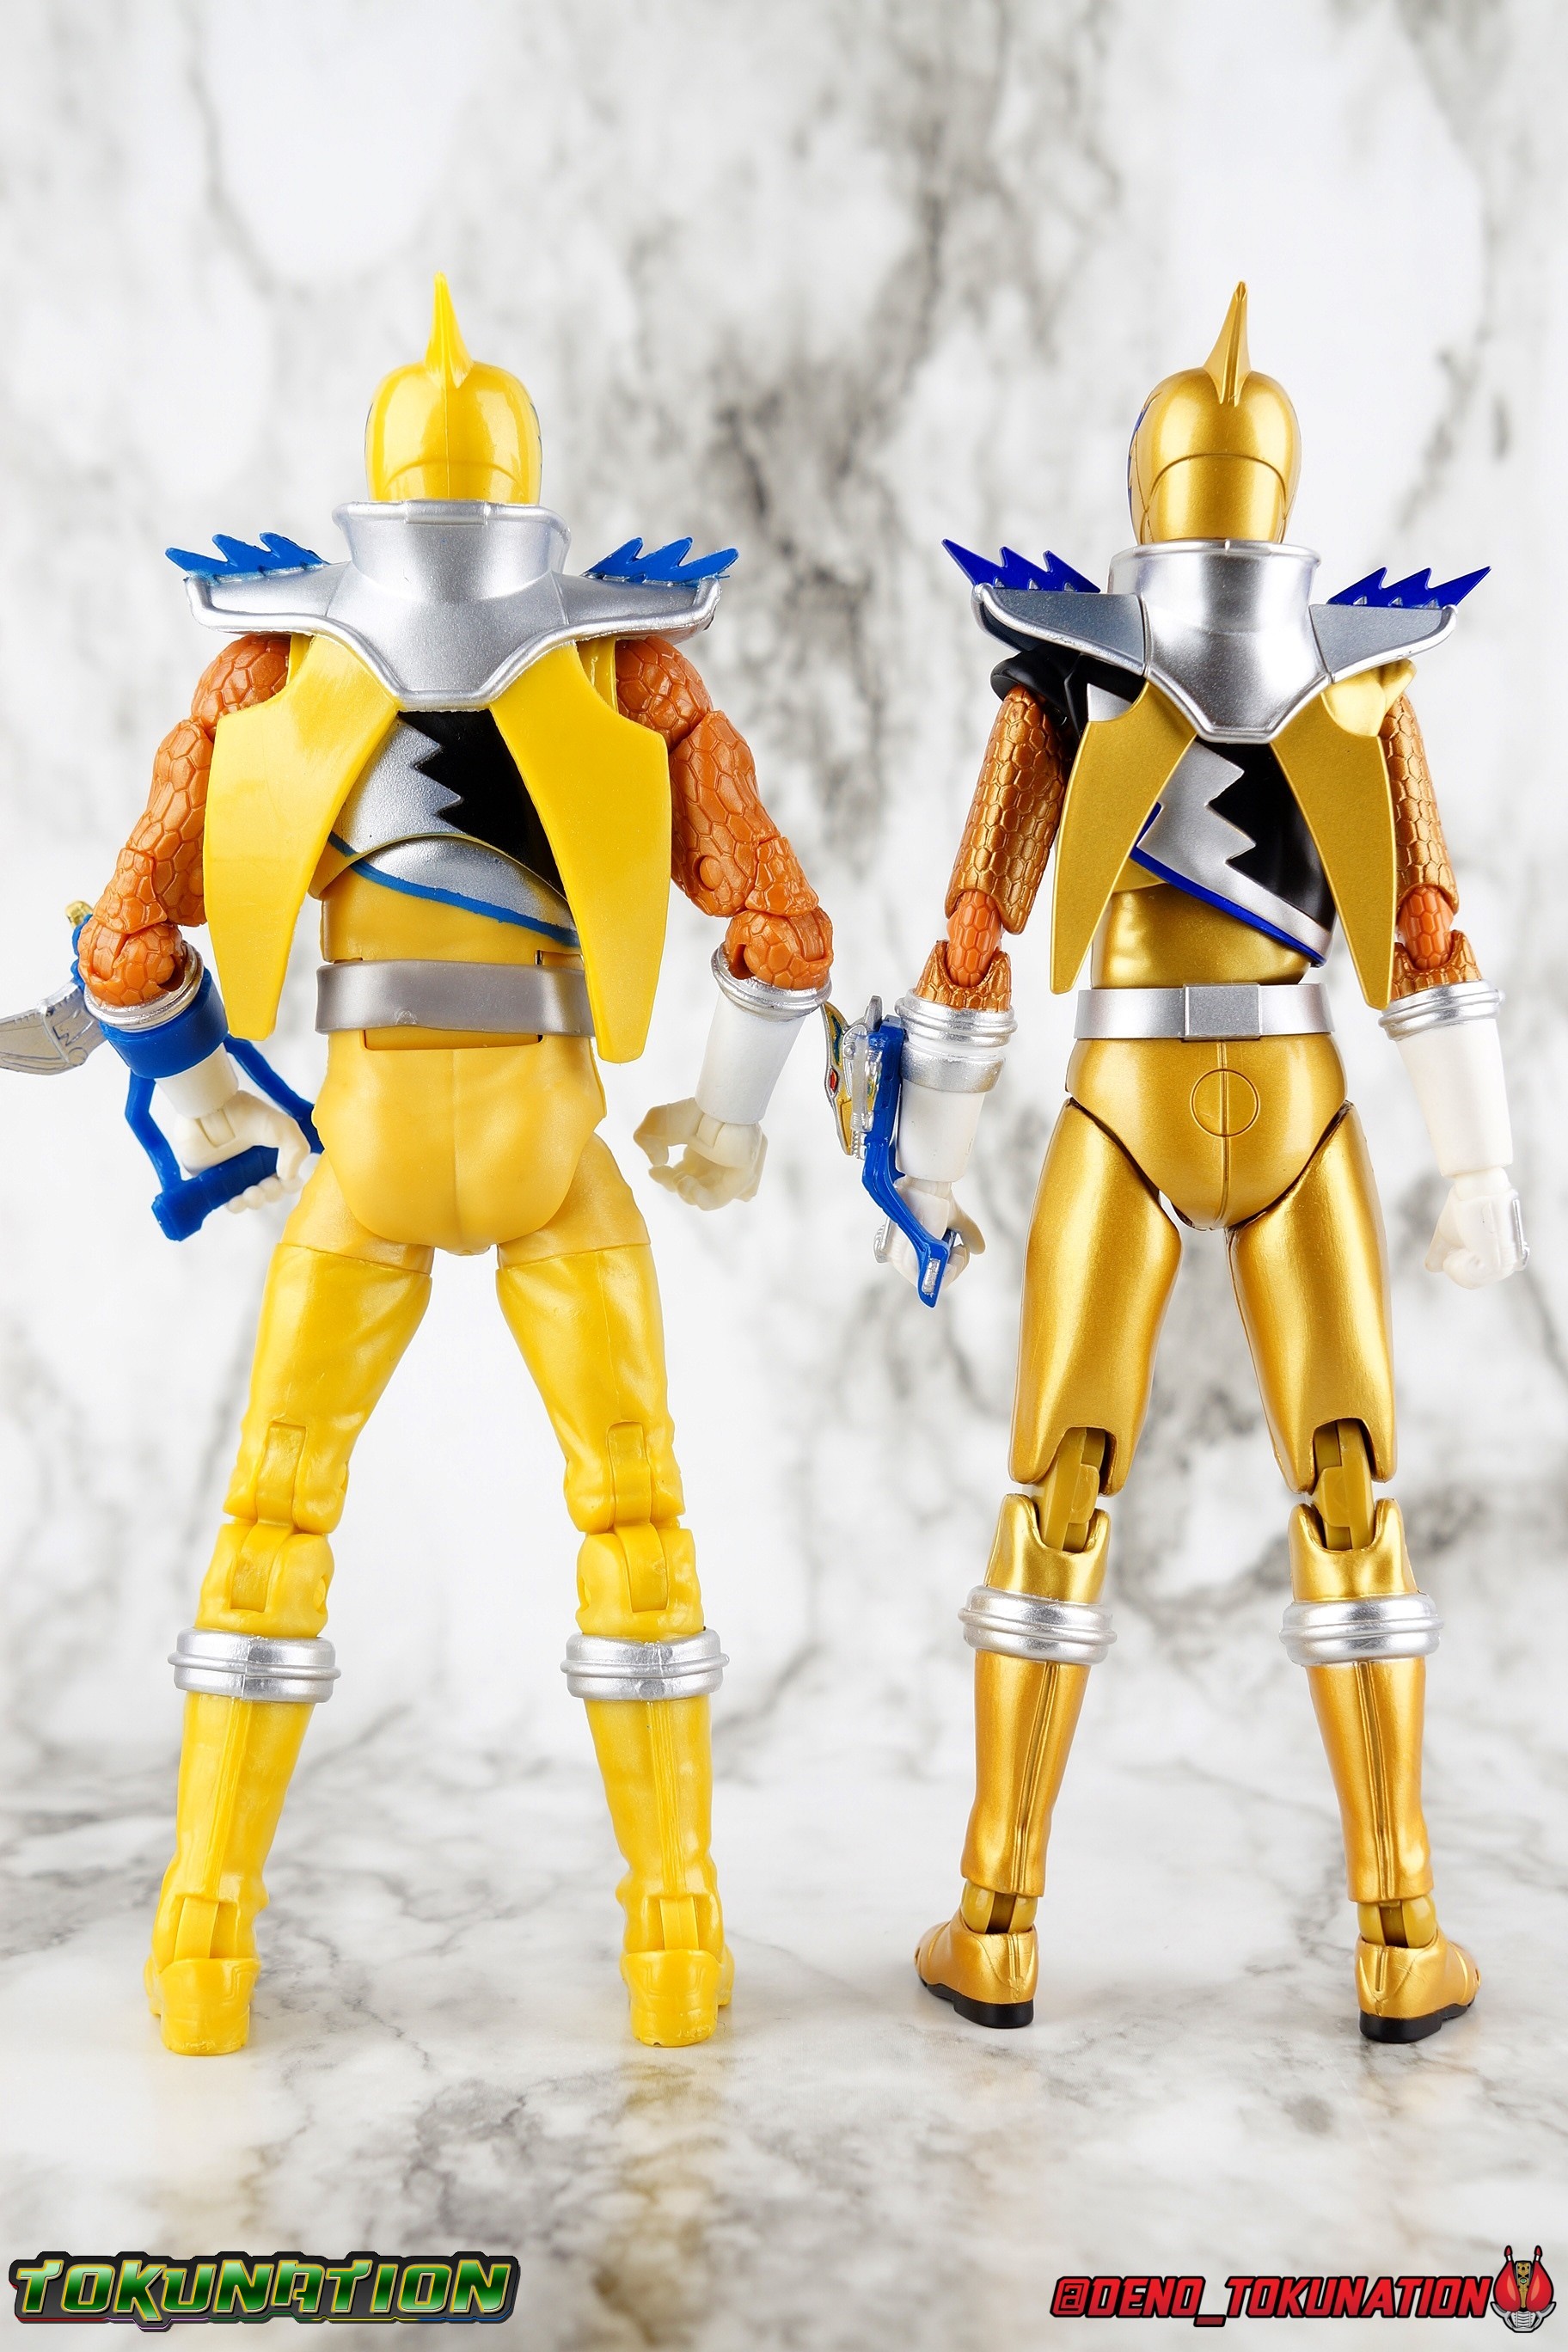 Toku Toy Box Power Rangers Lightning Collection Dino Charge Gold